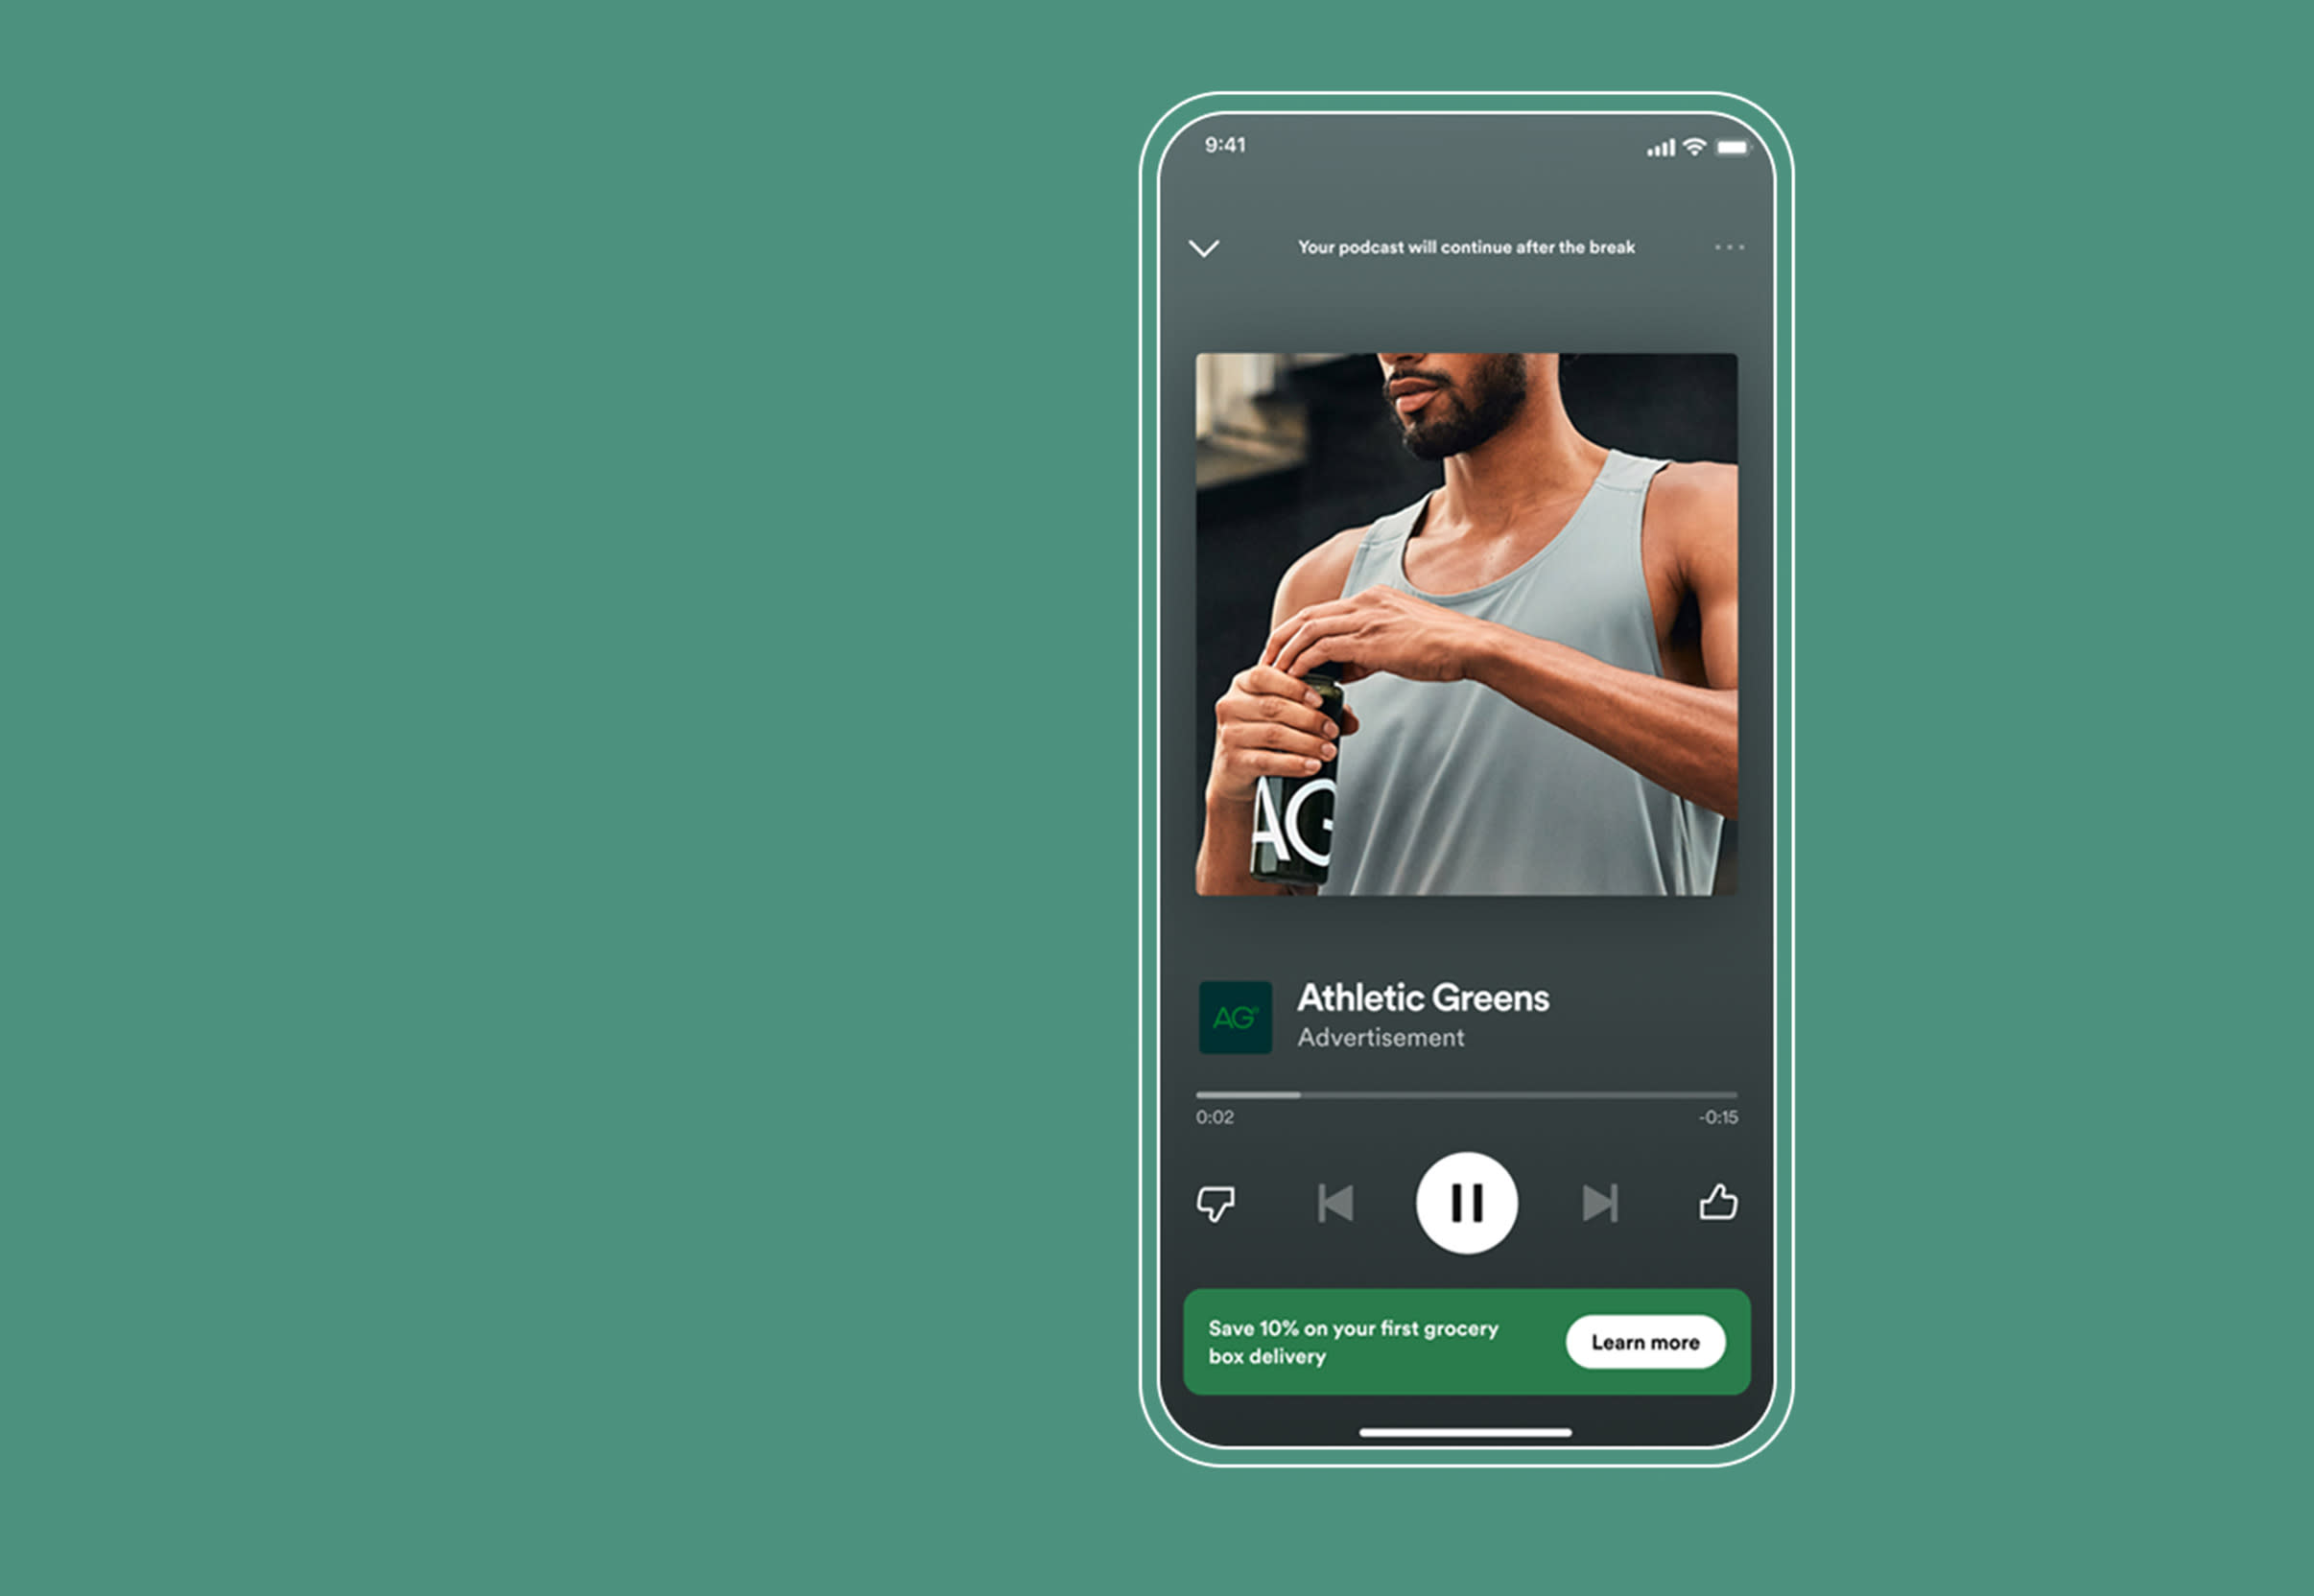 How To Rate Podcasts On Spotify (And Why You Should)